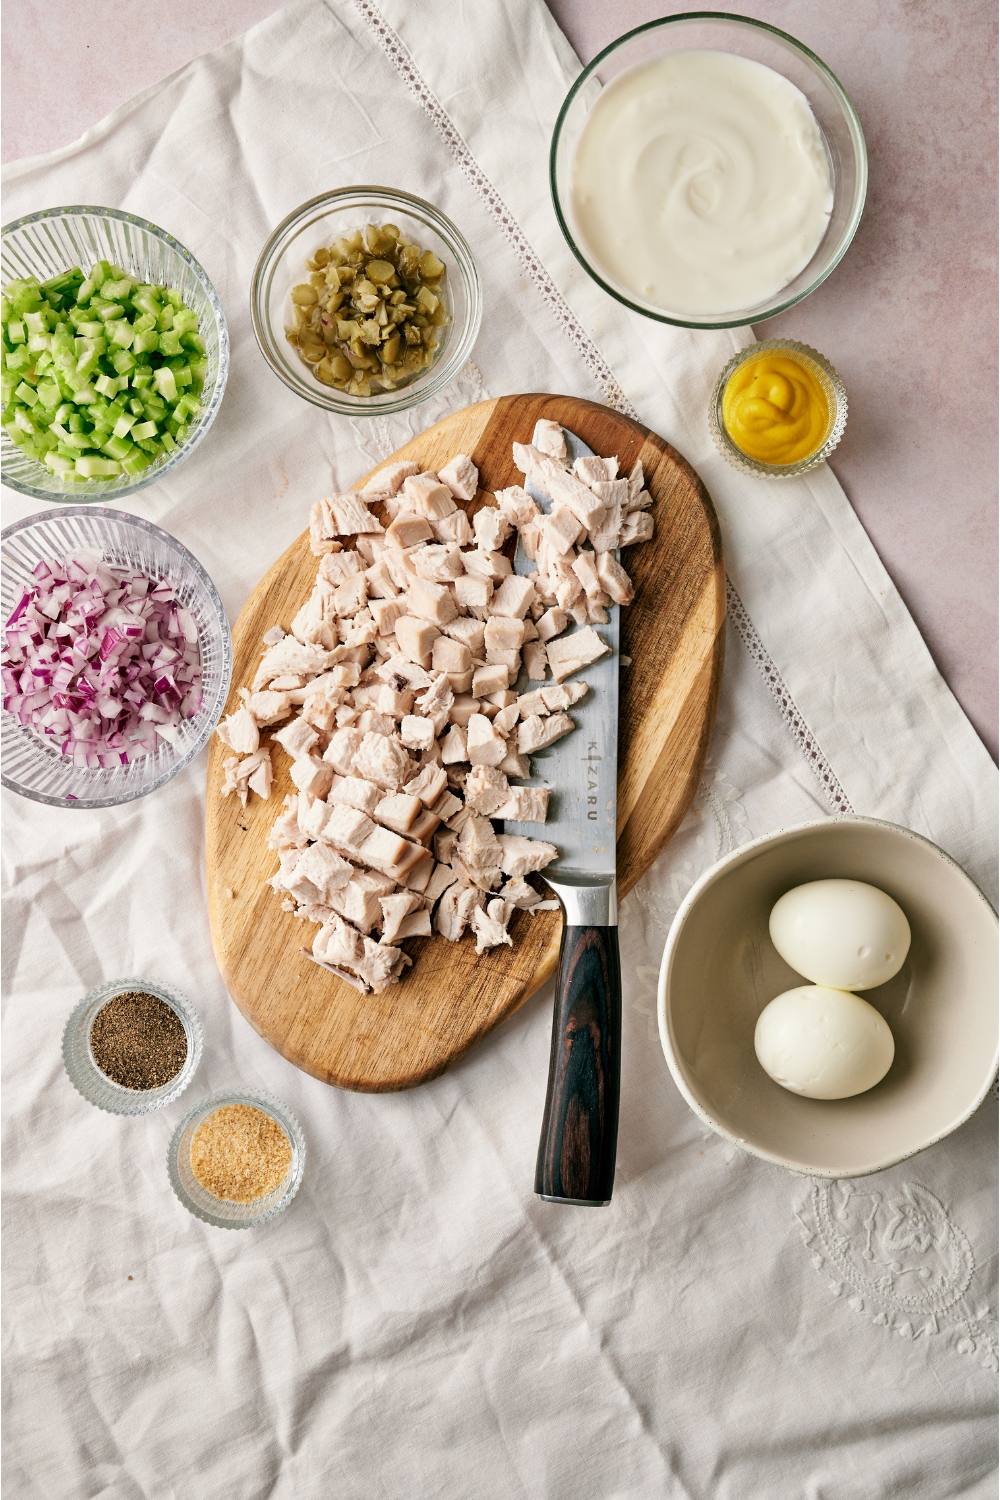 An assortment of ingredients including chopped chicken on a wooden board and small bowls of mayonnaise, mustard, hard boiled eggs, spices, chopped celery, red onion, and pickles.